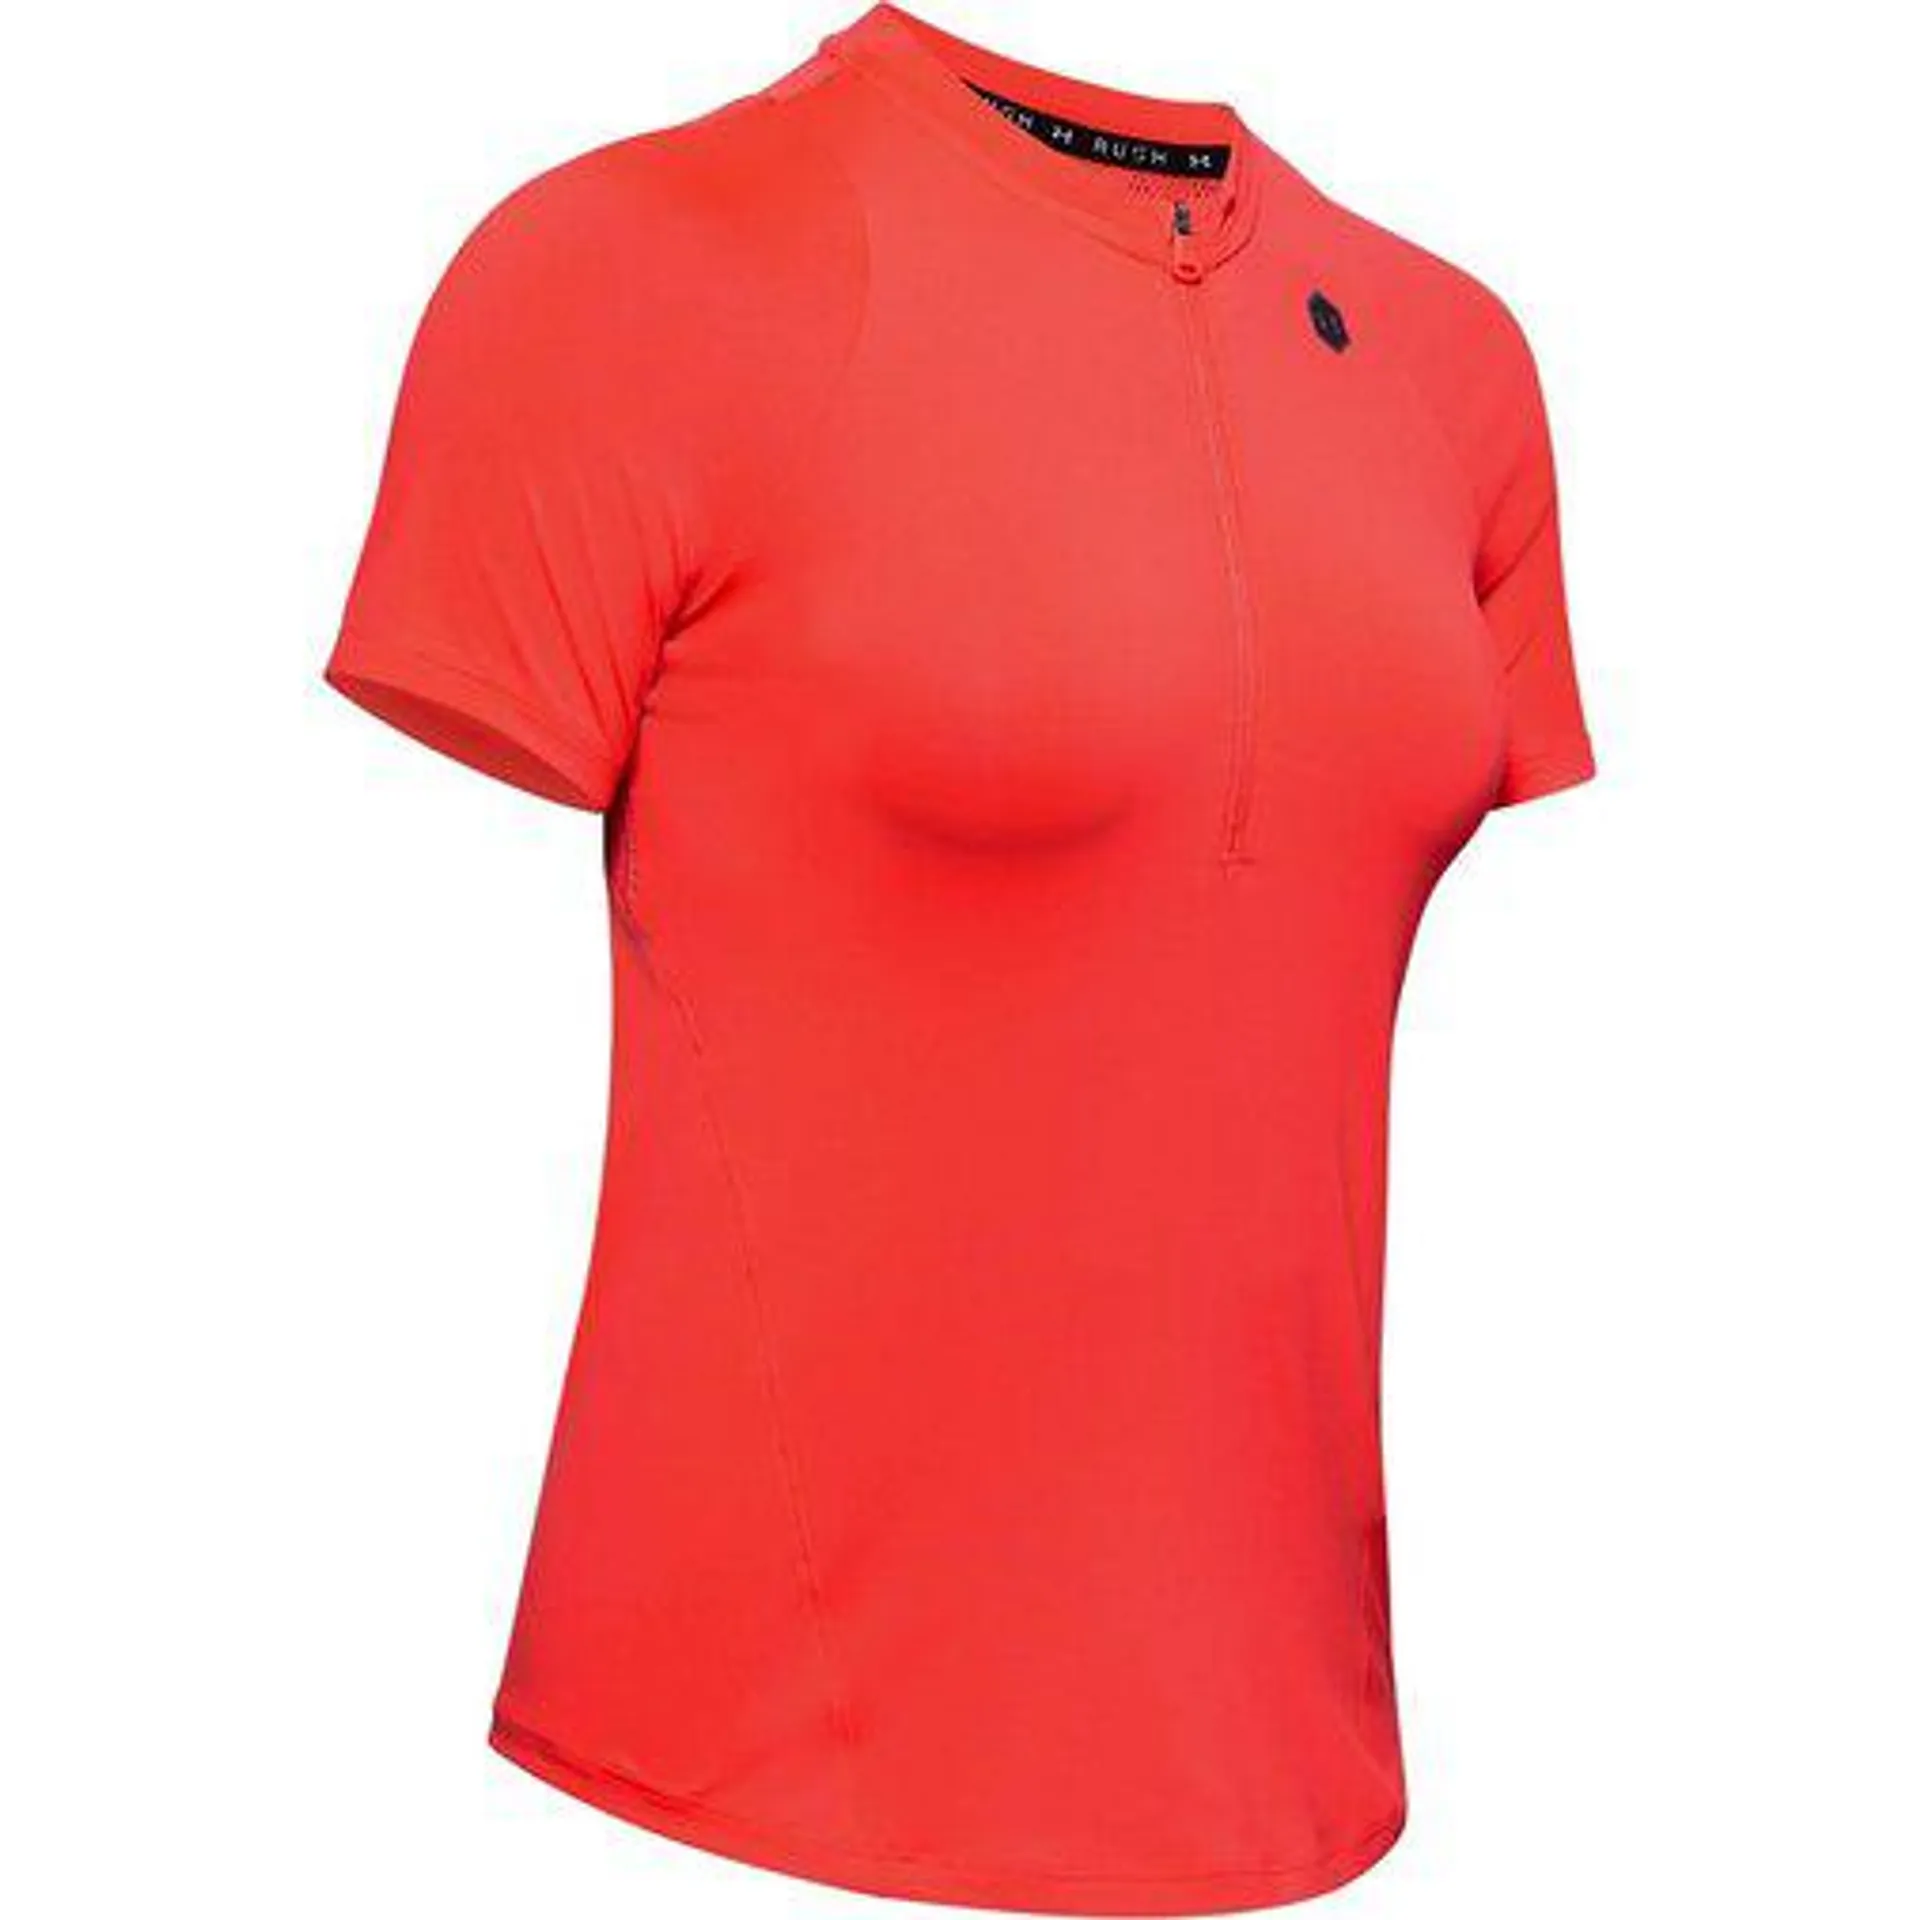 Under Armour Vent Top